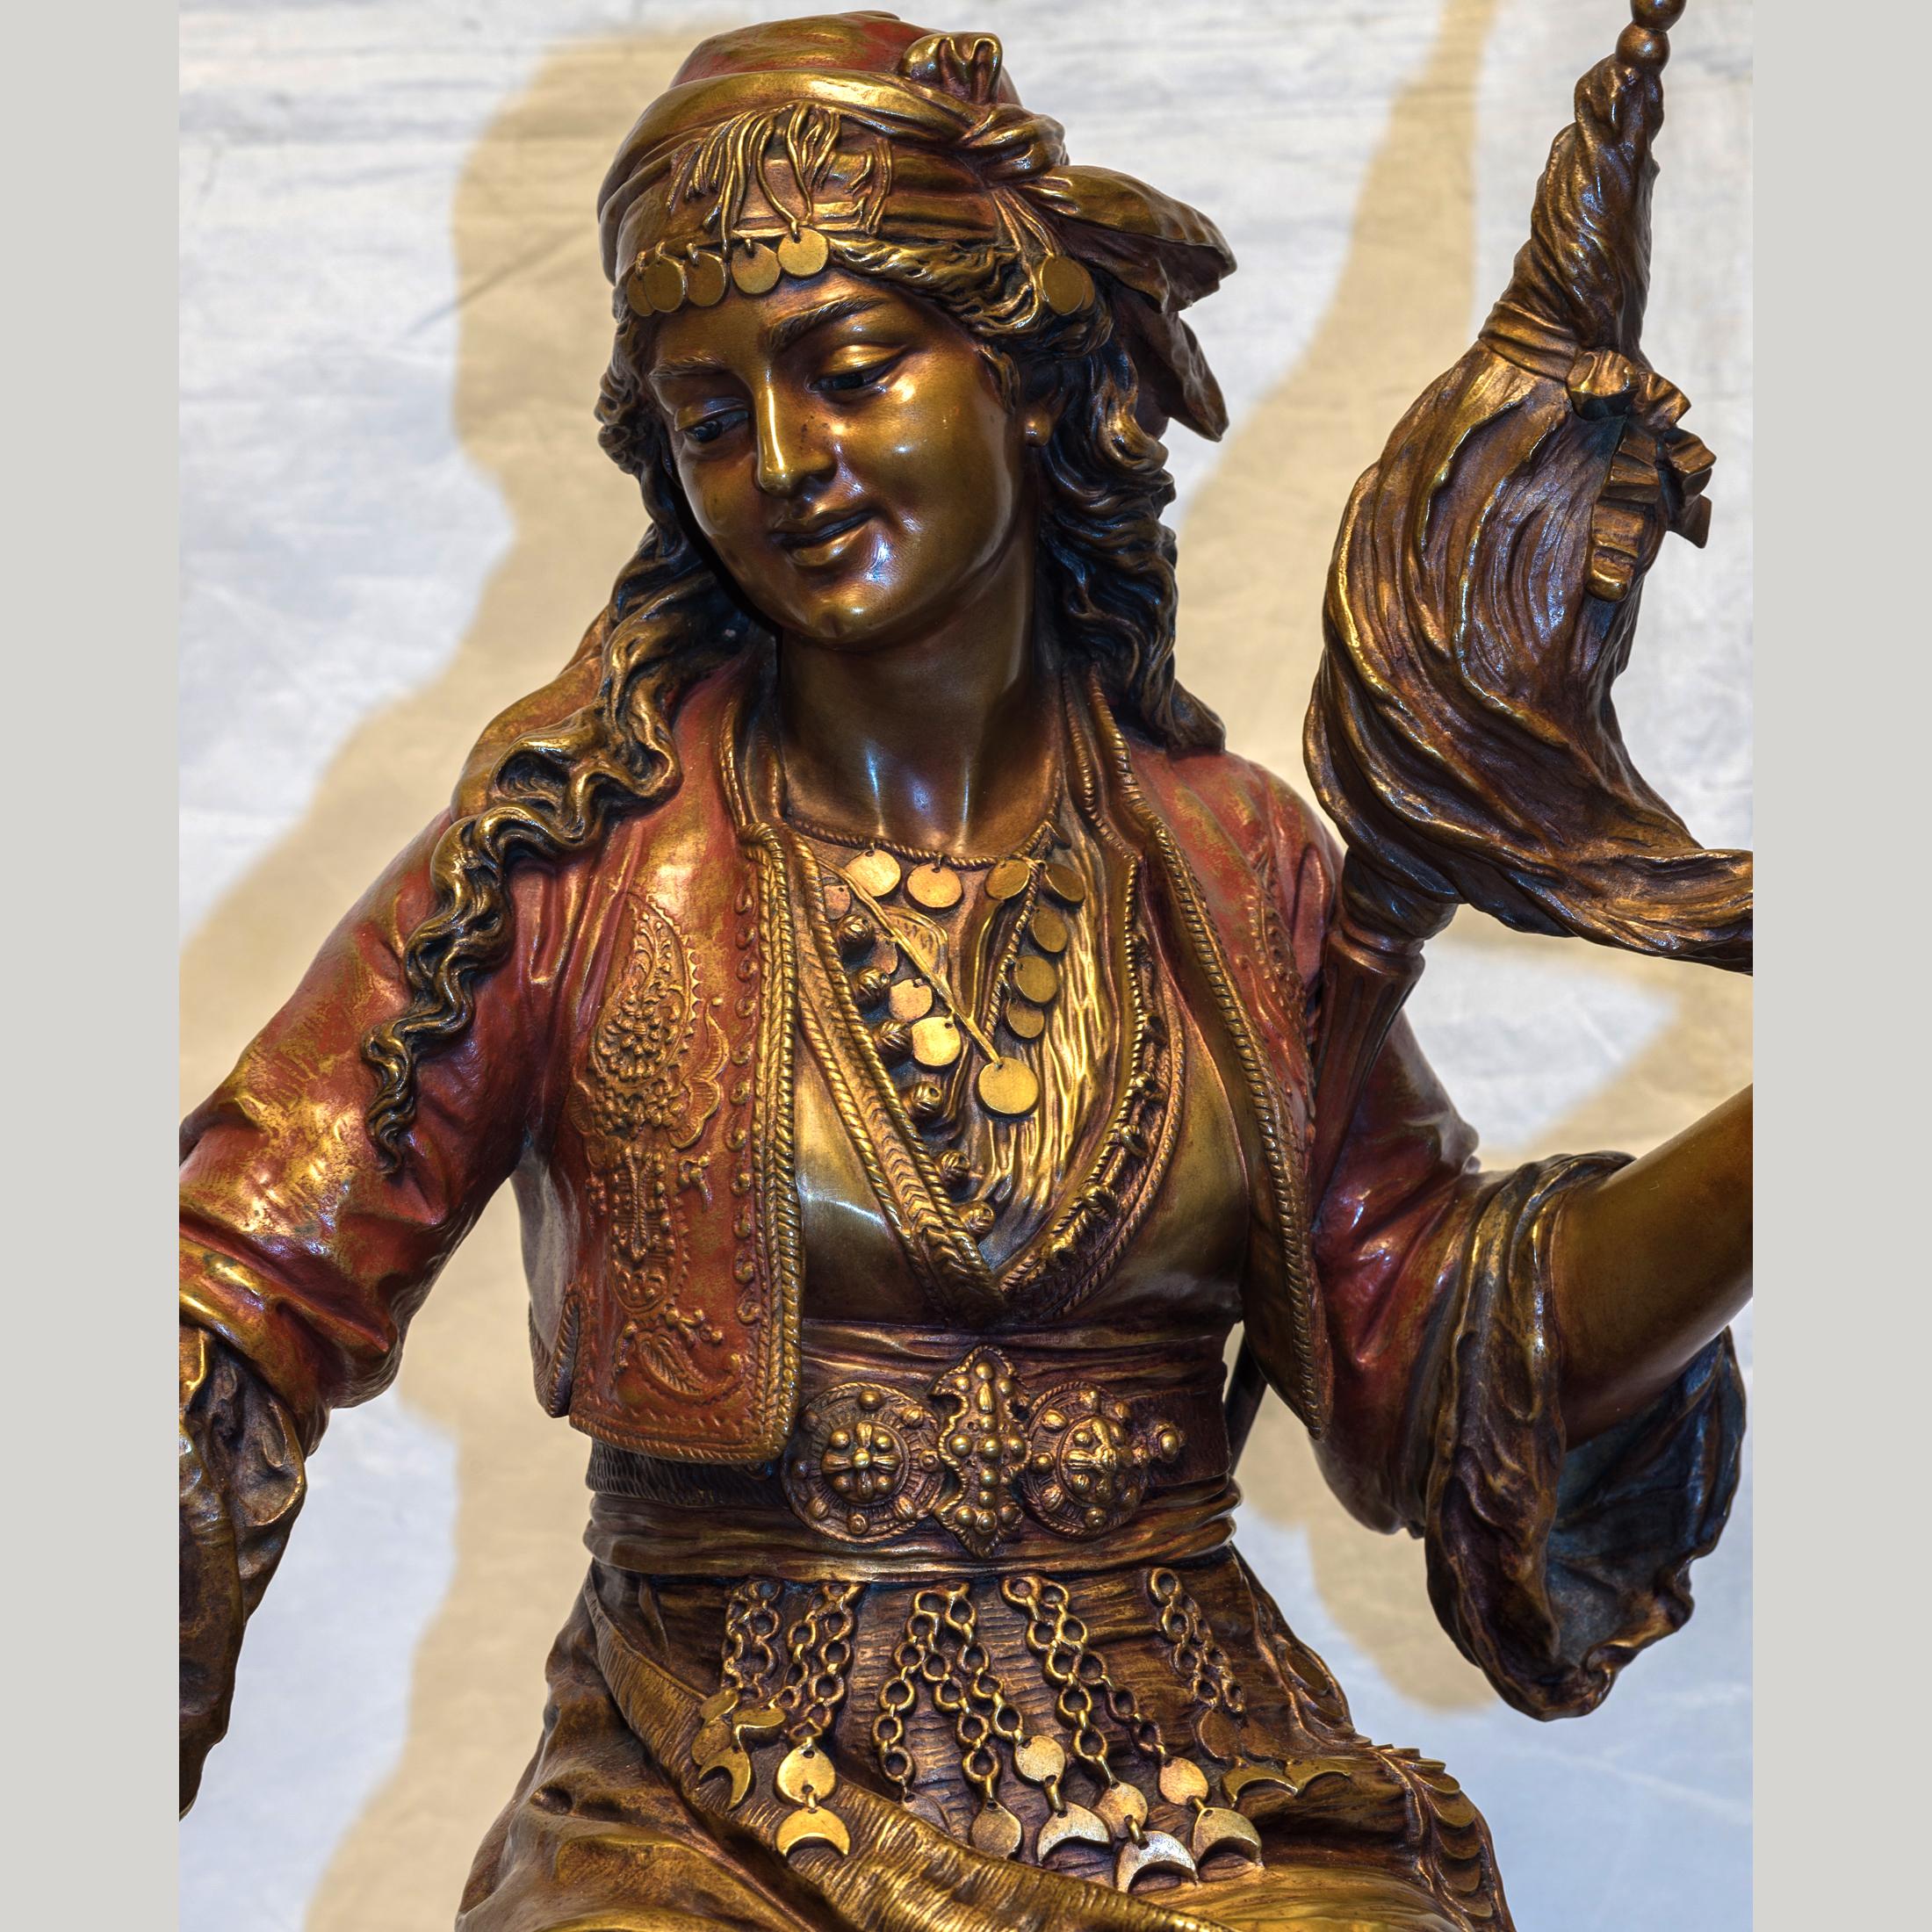 ÉMILE CORIOLAN HIPPOLYTE GUILLEMIN  
French, (1841-1907)

Pair of Female Gypsies       
    
Both signed ‘Ele Guillemin’.   
22 1/2 x 14 inches  

Notes:
A fine quality pair of polychrome bronze sculptures of a seated gypsy lady playing a lute and